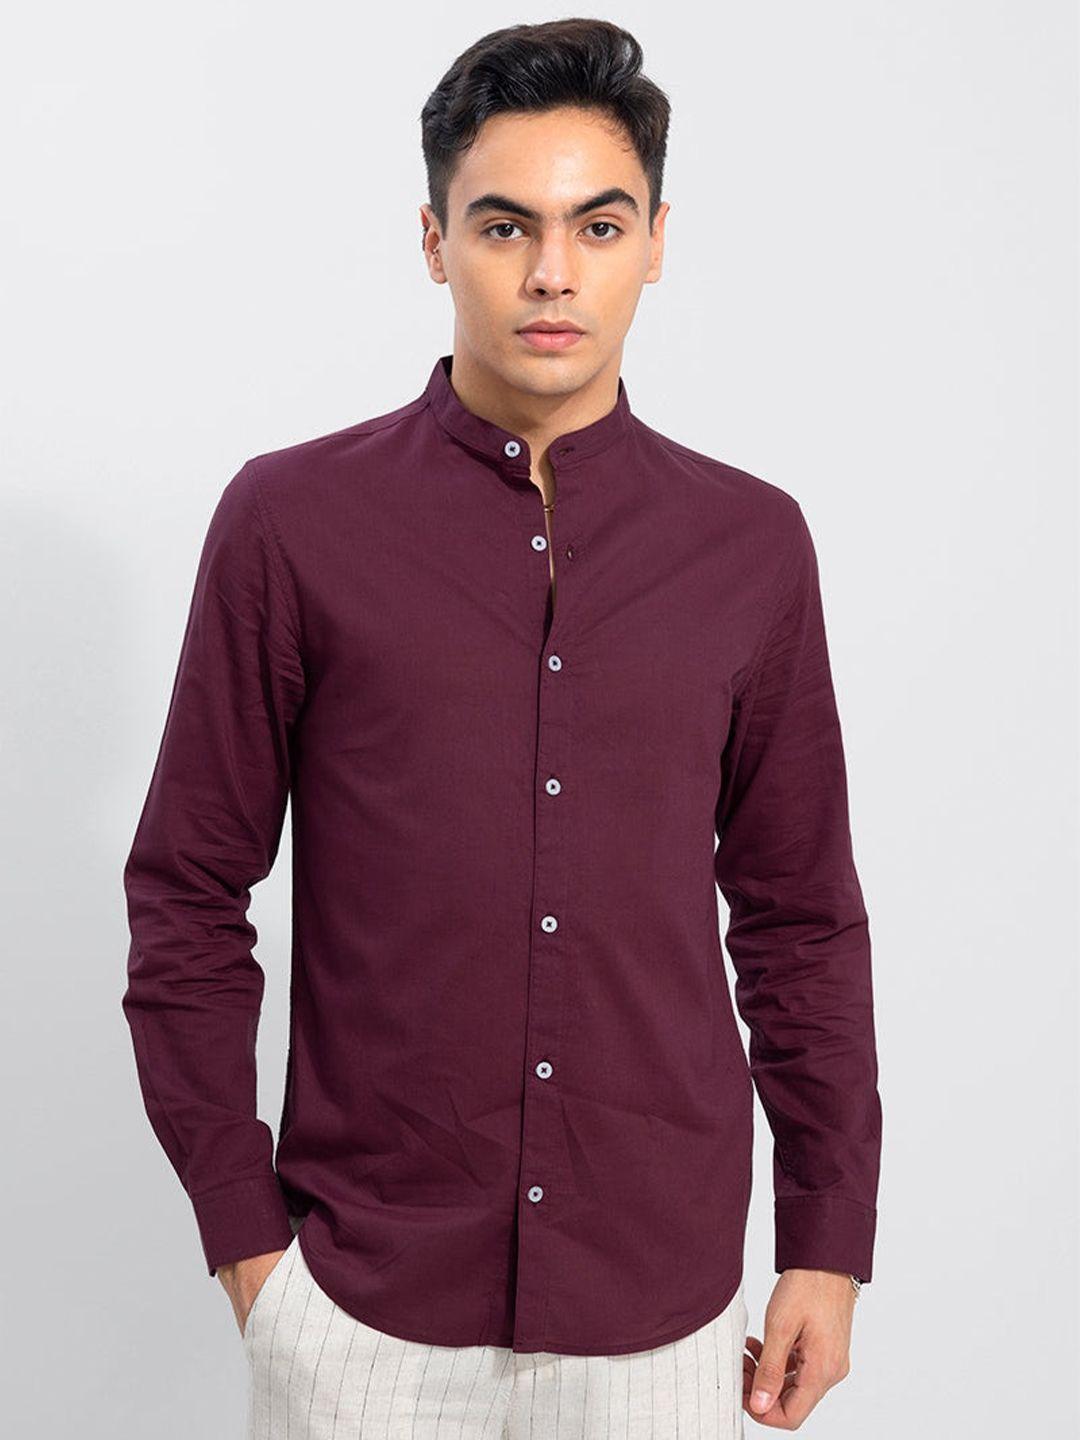 snitch maroon classic band collar slim fit cotton casual shirt